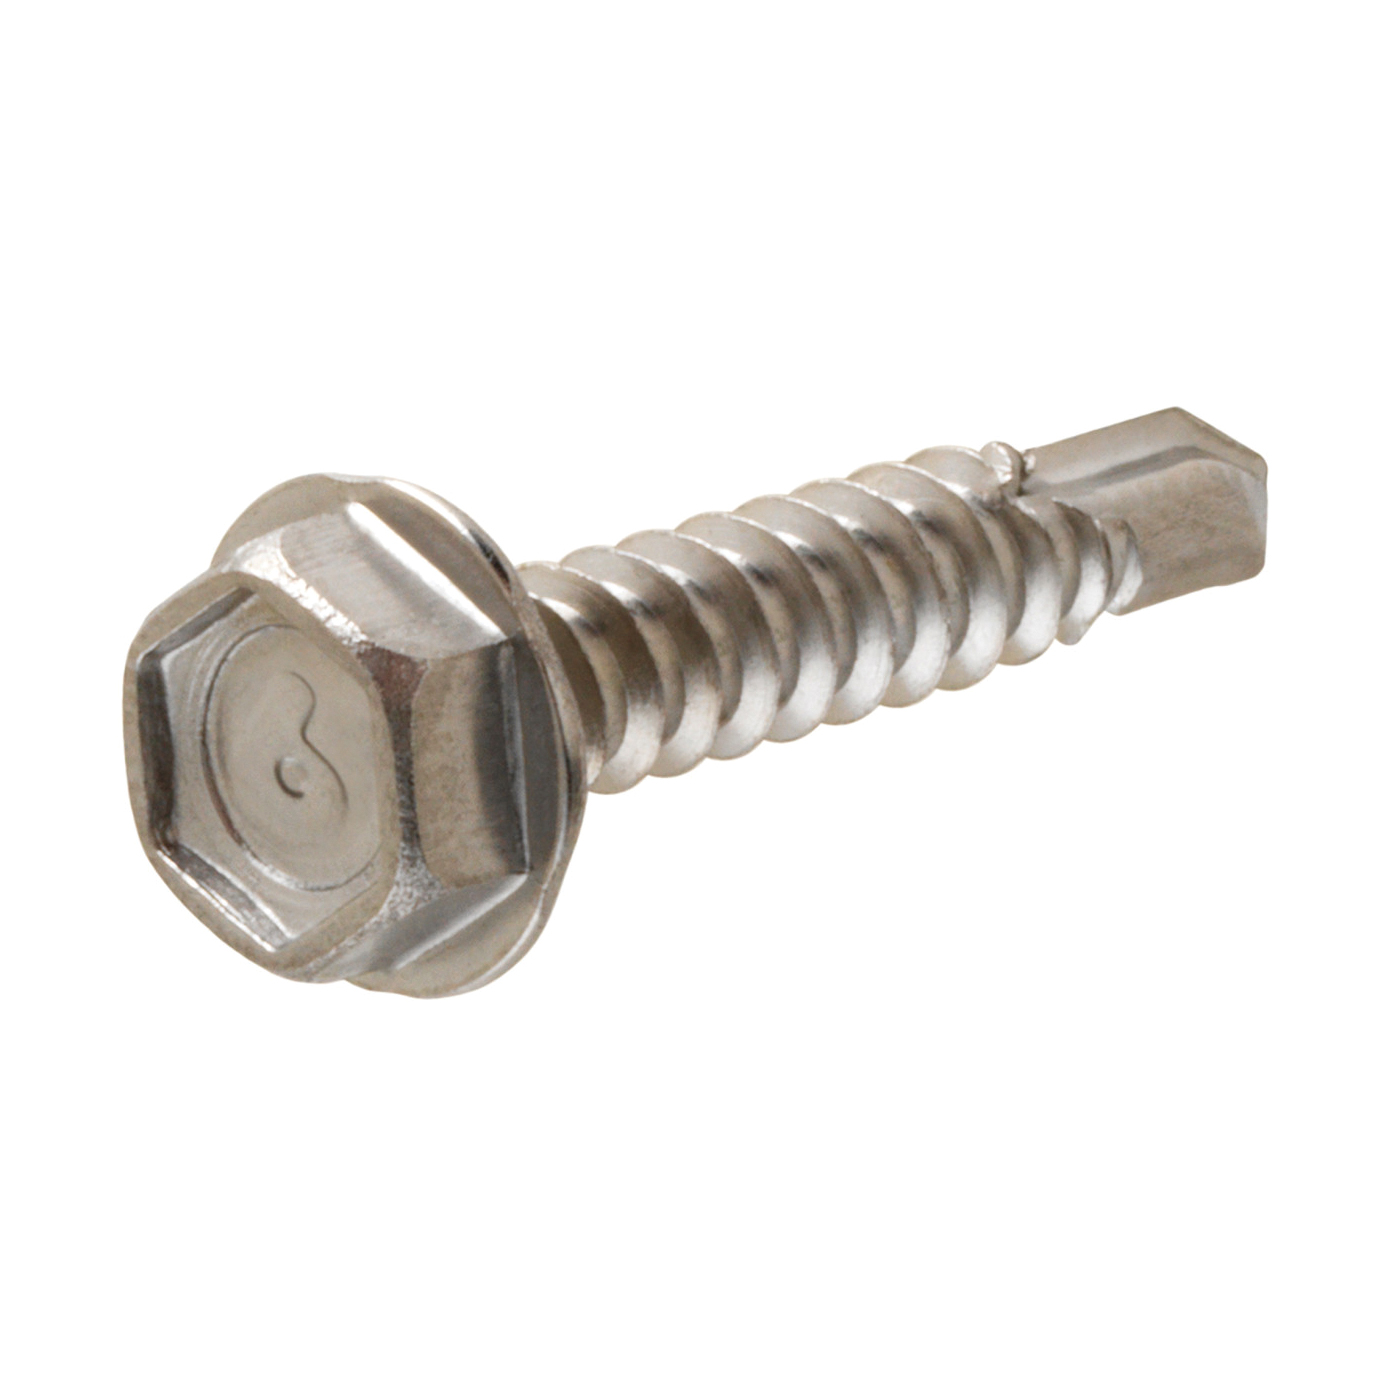 881839 Screw, #10 Thread, 1-1/2 in L, Washer Head, Hex Drive, Self-Drilling Point, Stainless Steel